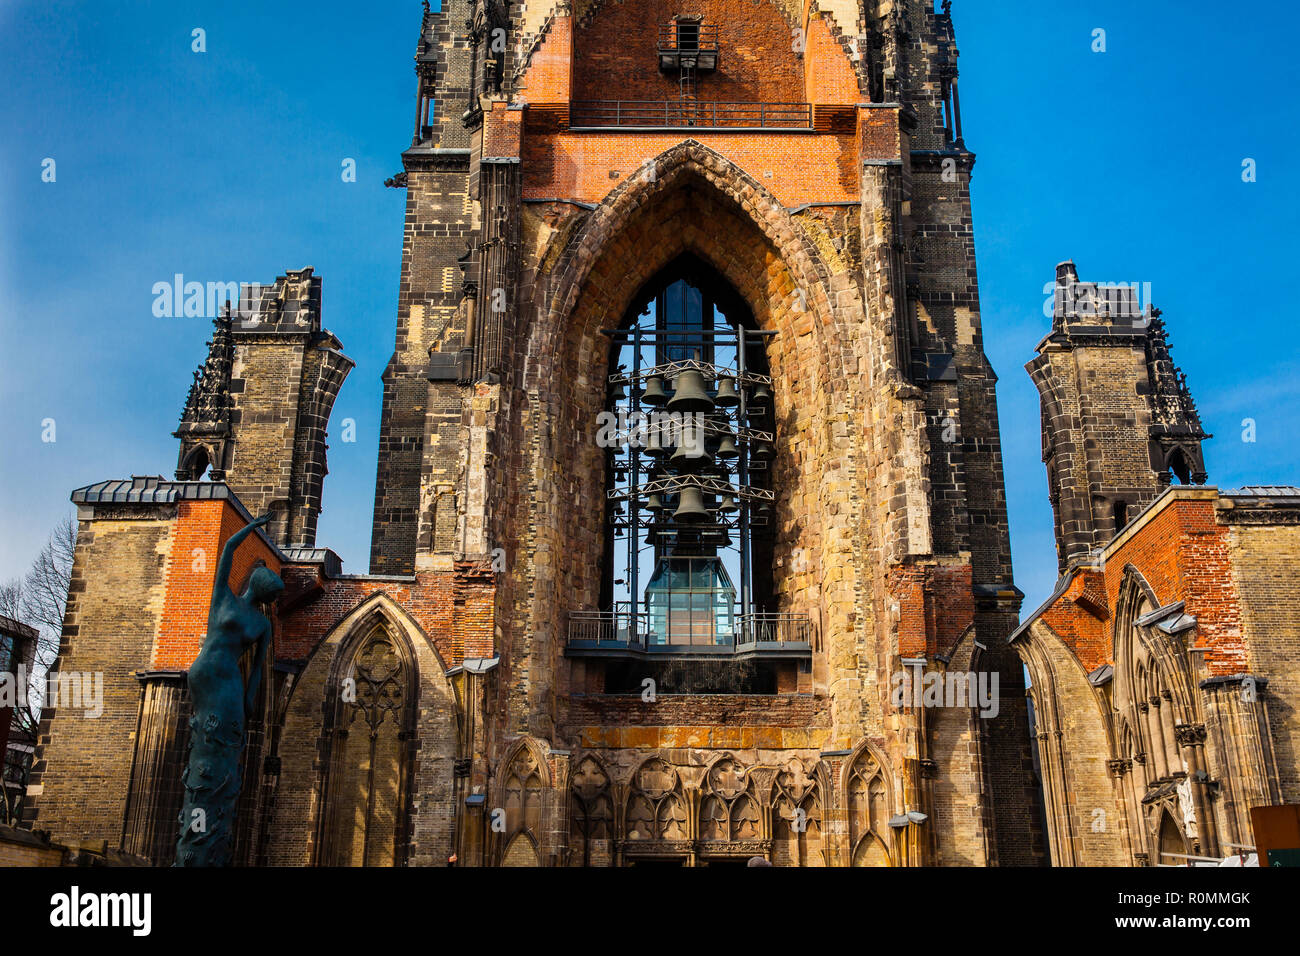 HAMBURG, GERMANY - MARCH, 2018: Remains of the Saint Nicholas church which was almost completely destroyed during the bombing of Hamburg in World War  Stock Photo